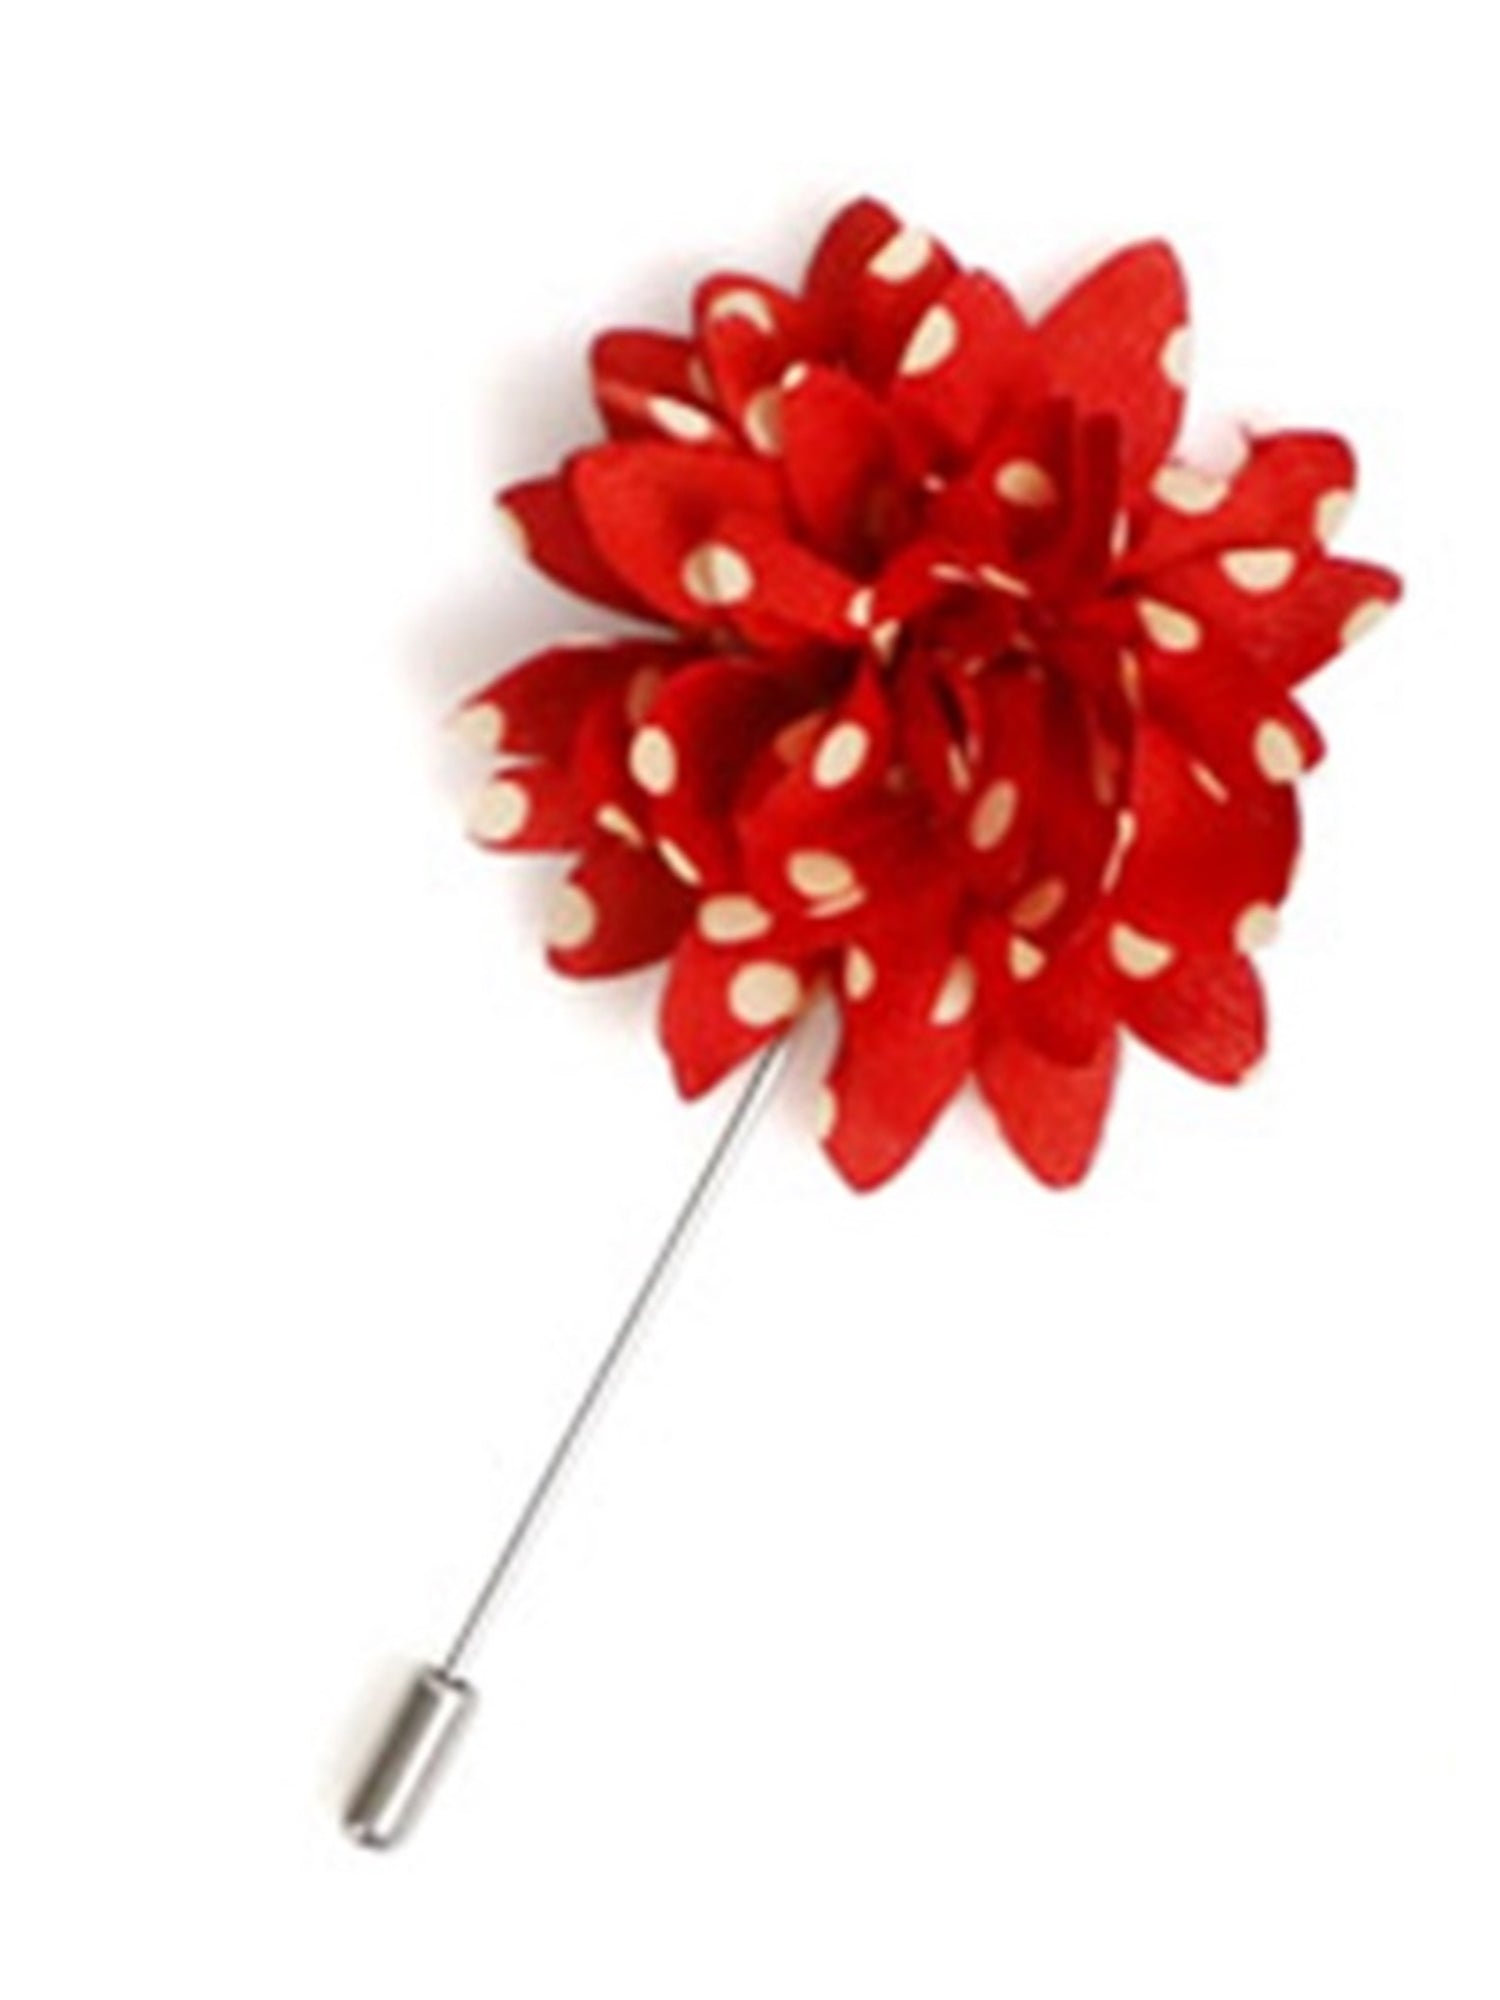 Men's Flower Lapel Pin Boutonniere For Suit Lapel Pin TheDapperTie Red & White Polka Dots Regular 